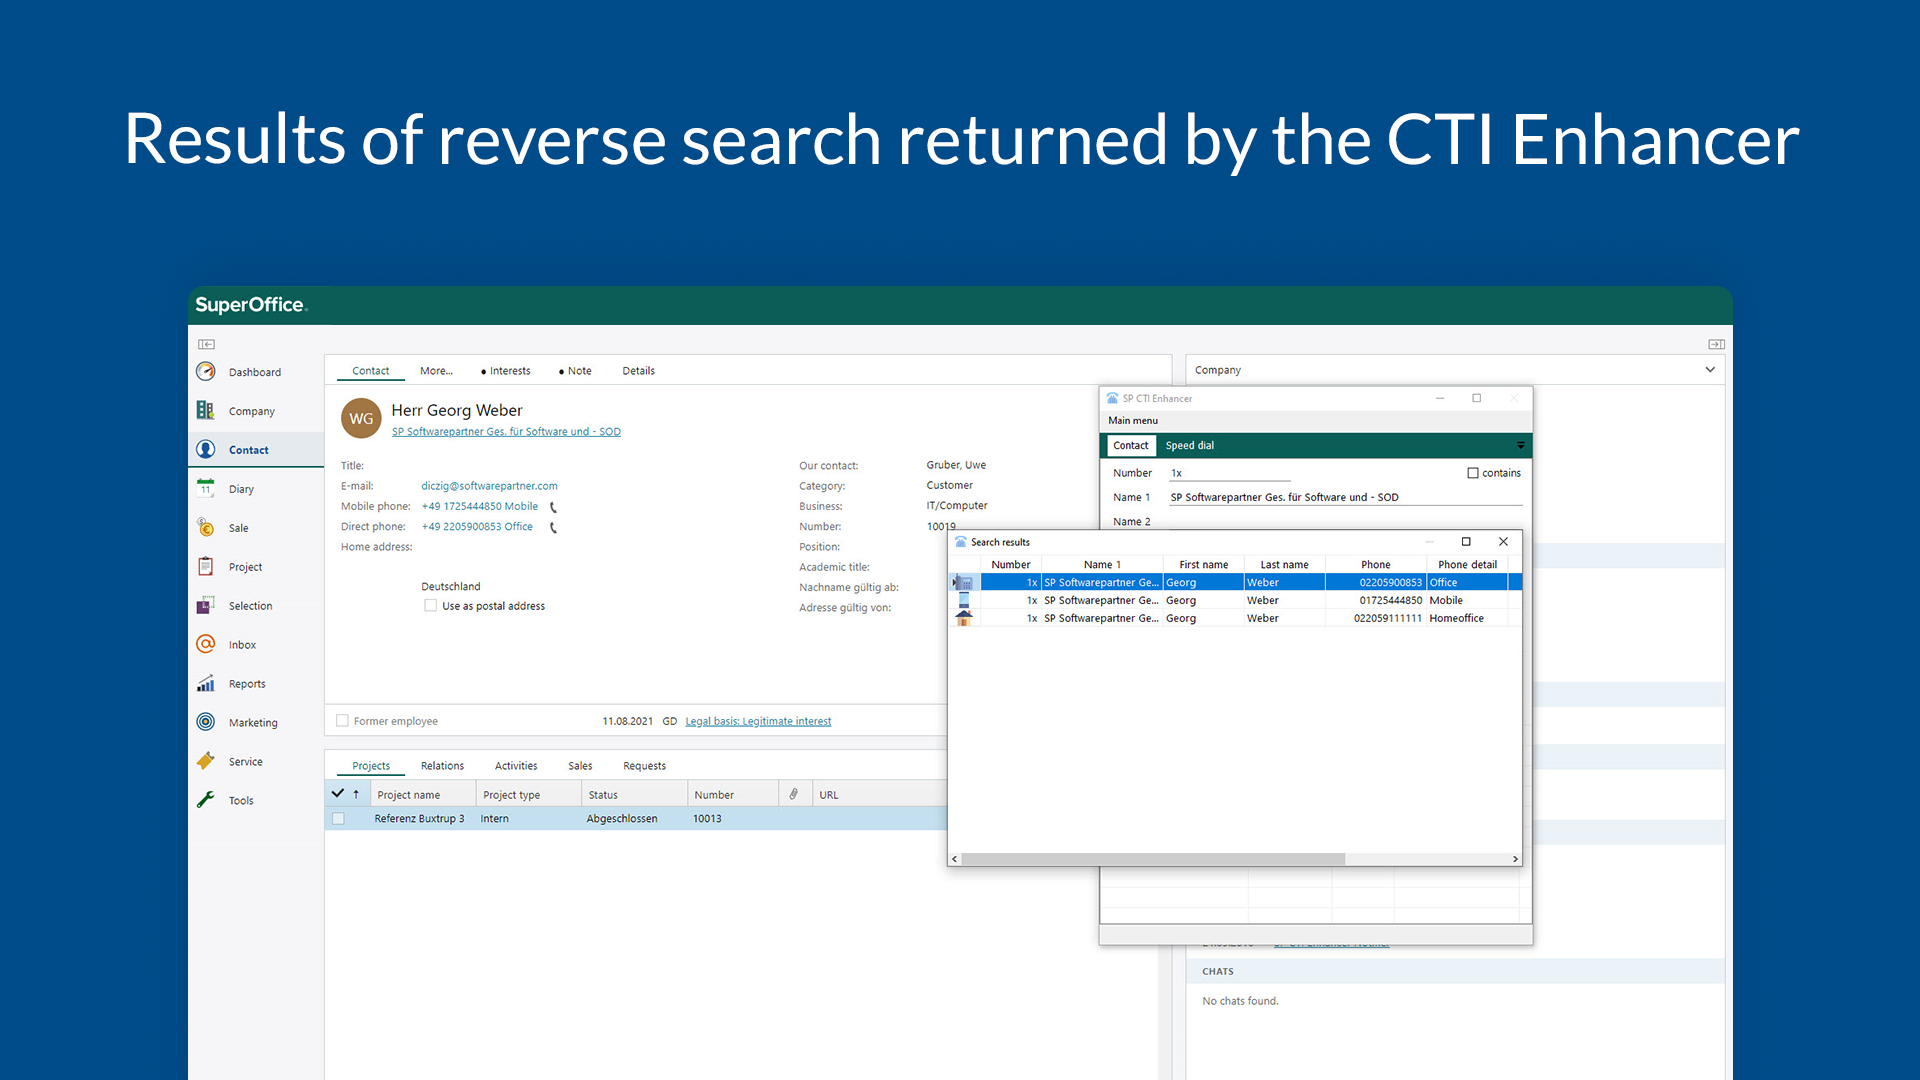 Results of reverse search returned by the CTI Enhancer